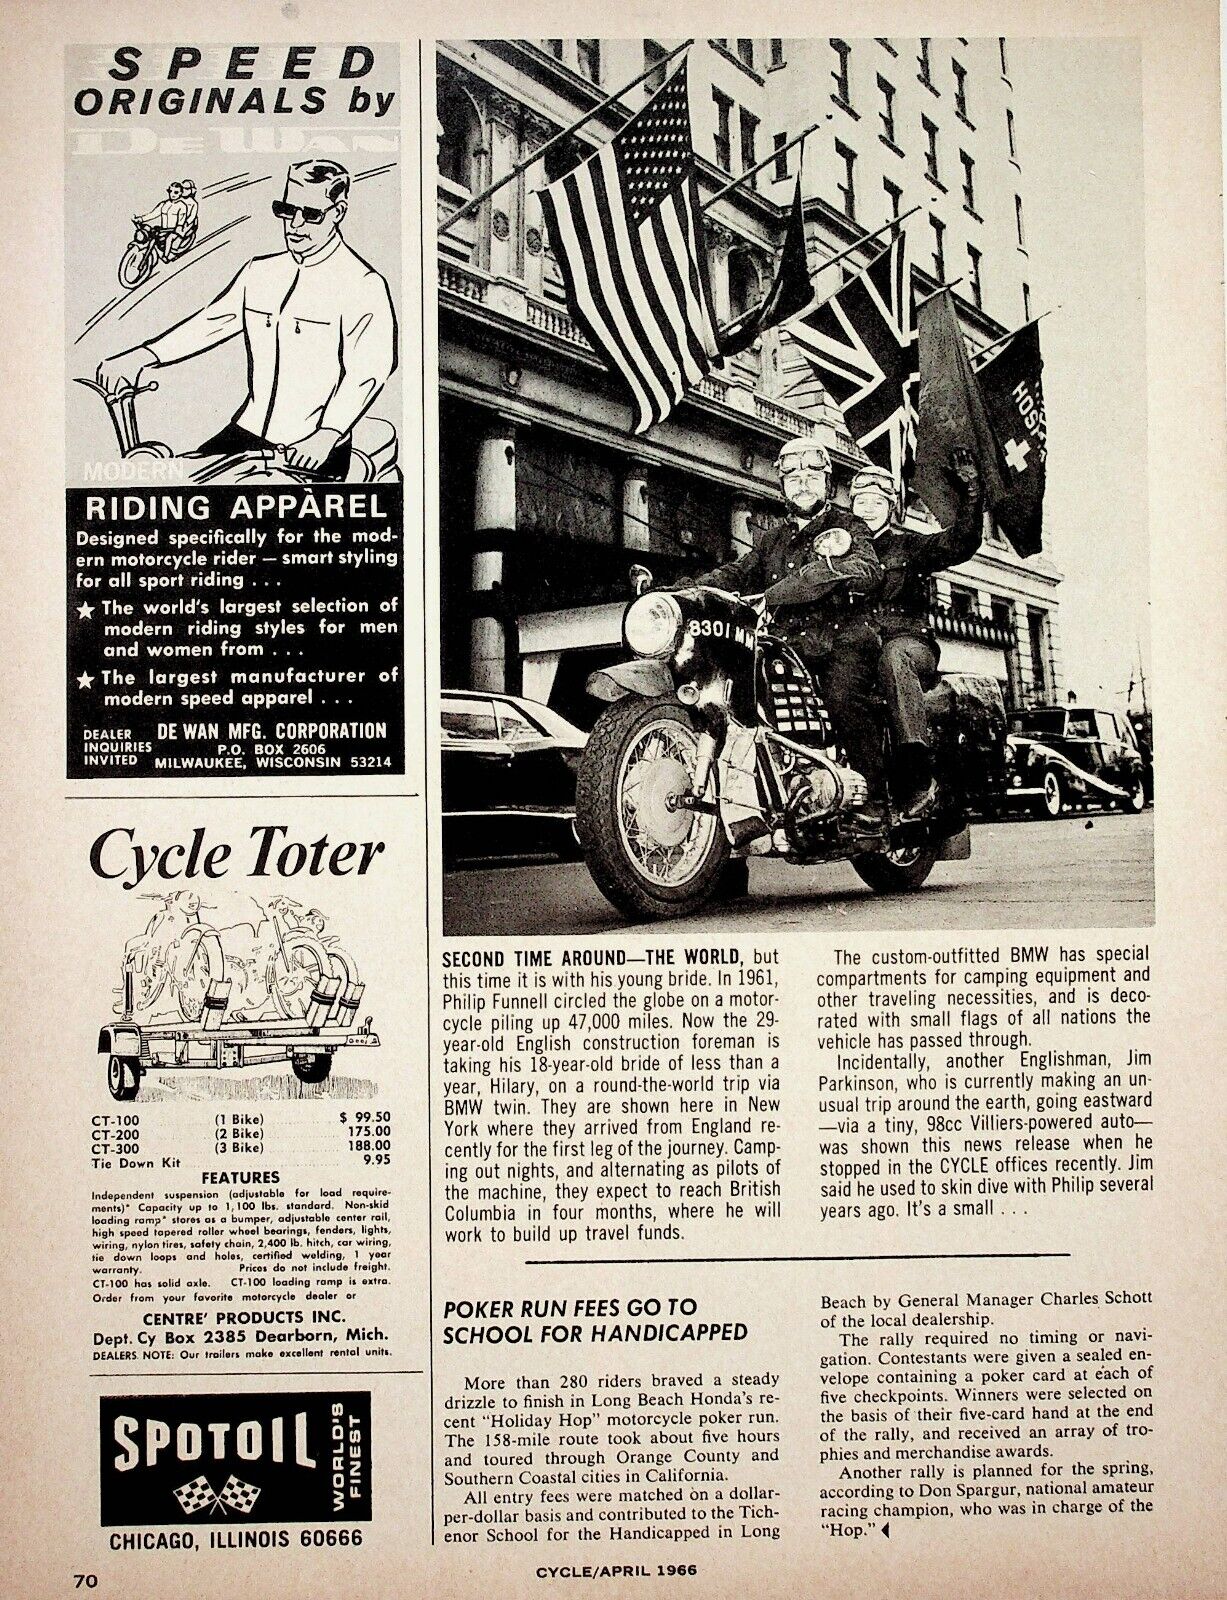 1966 BMW Philip Funnell World Tour New York - 1-Page Vintage Motorcycle Article